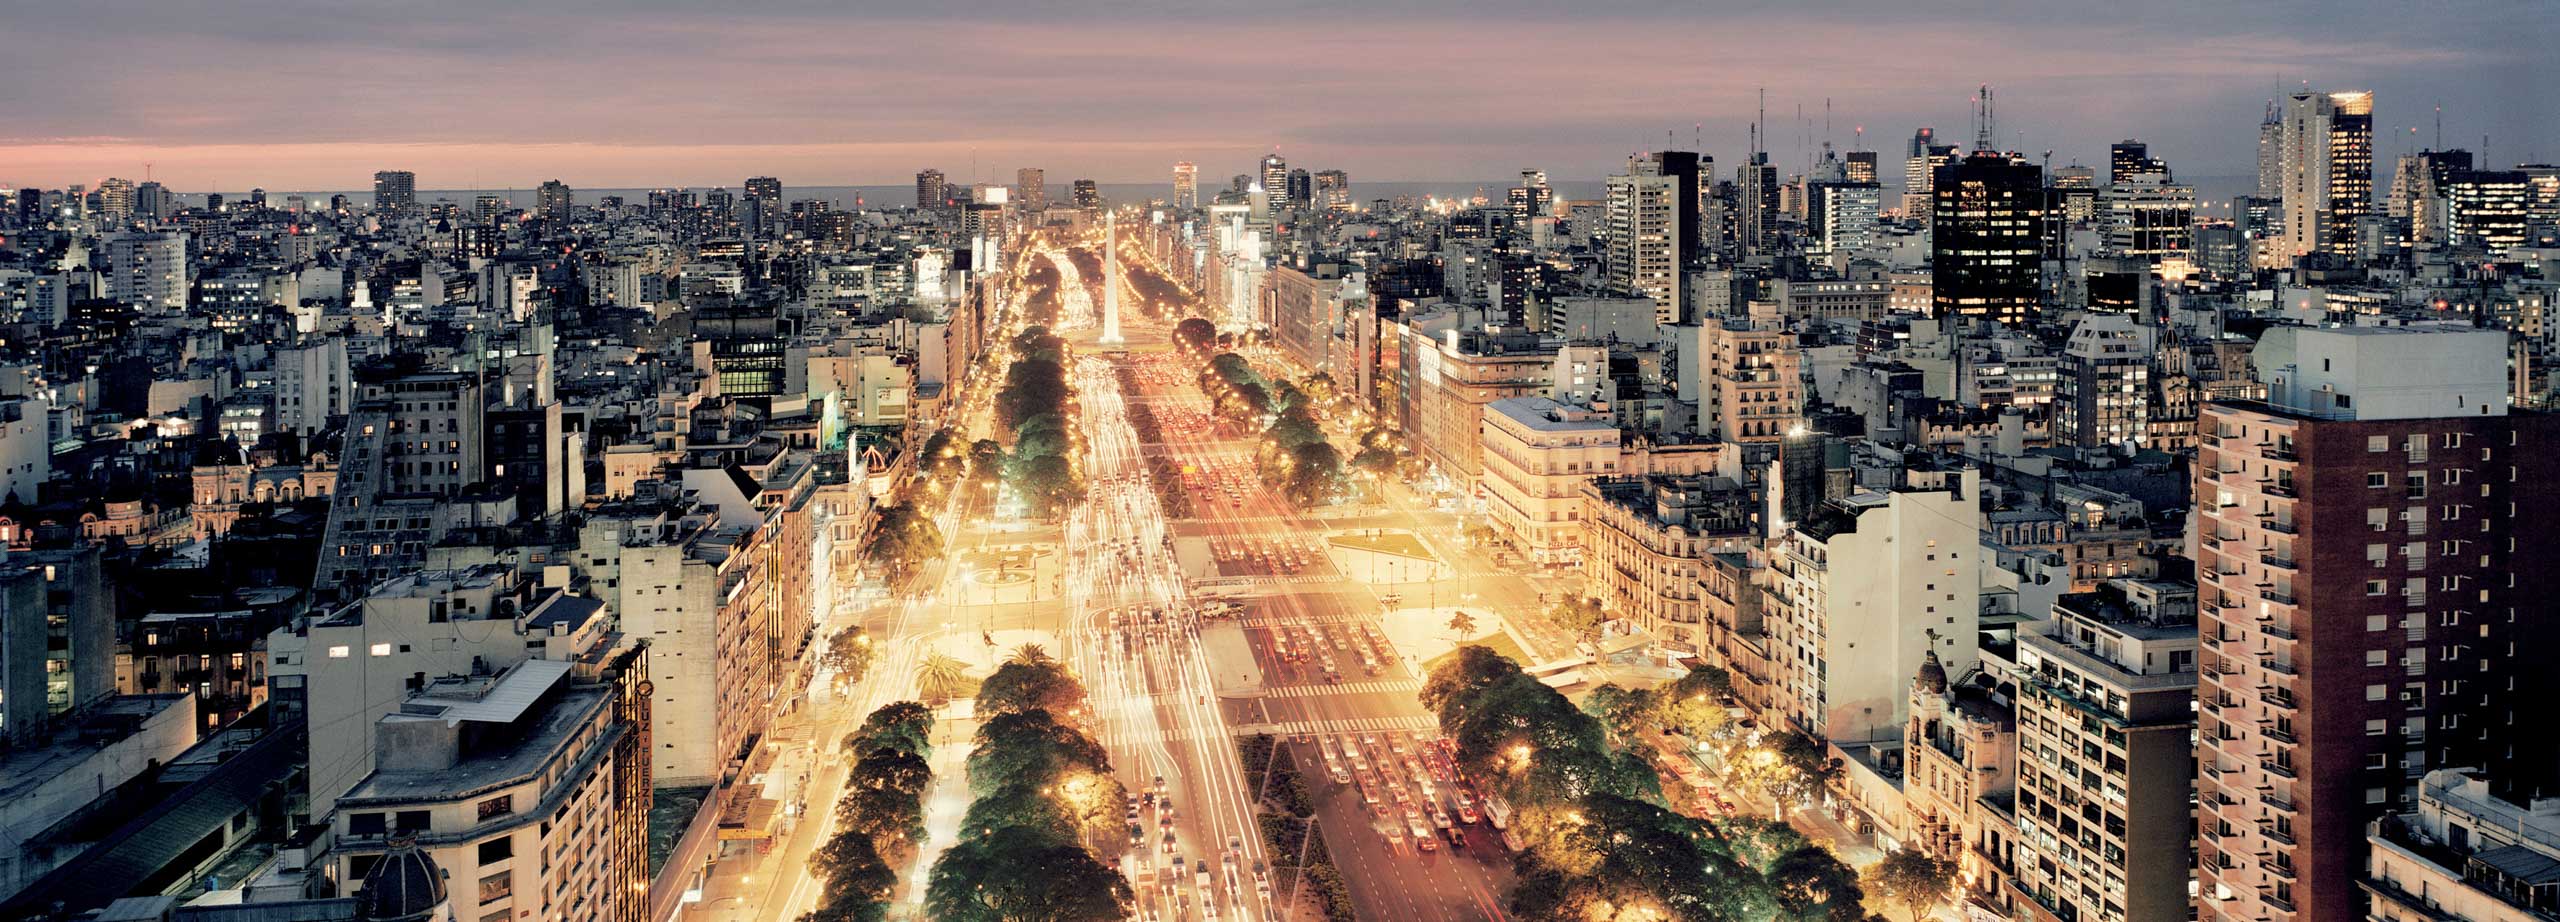 The Ultimate Guide To Buenos Aires